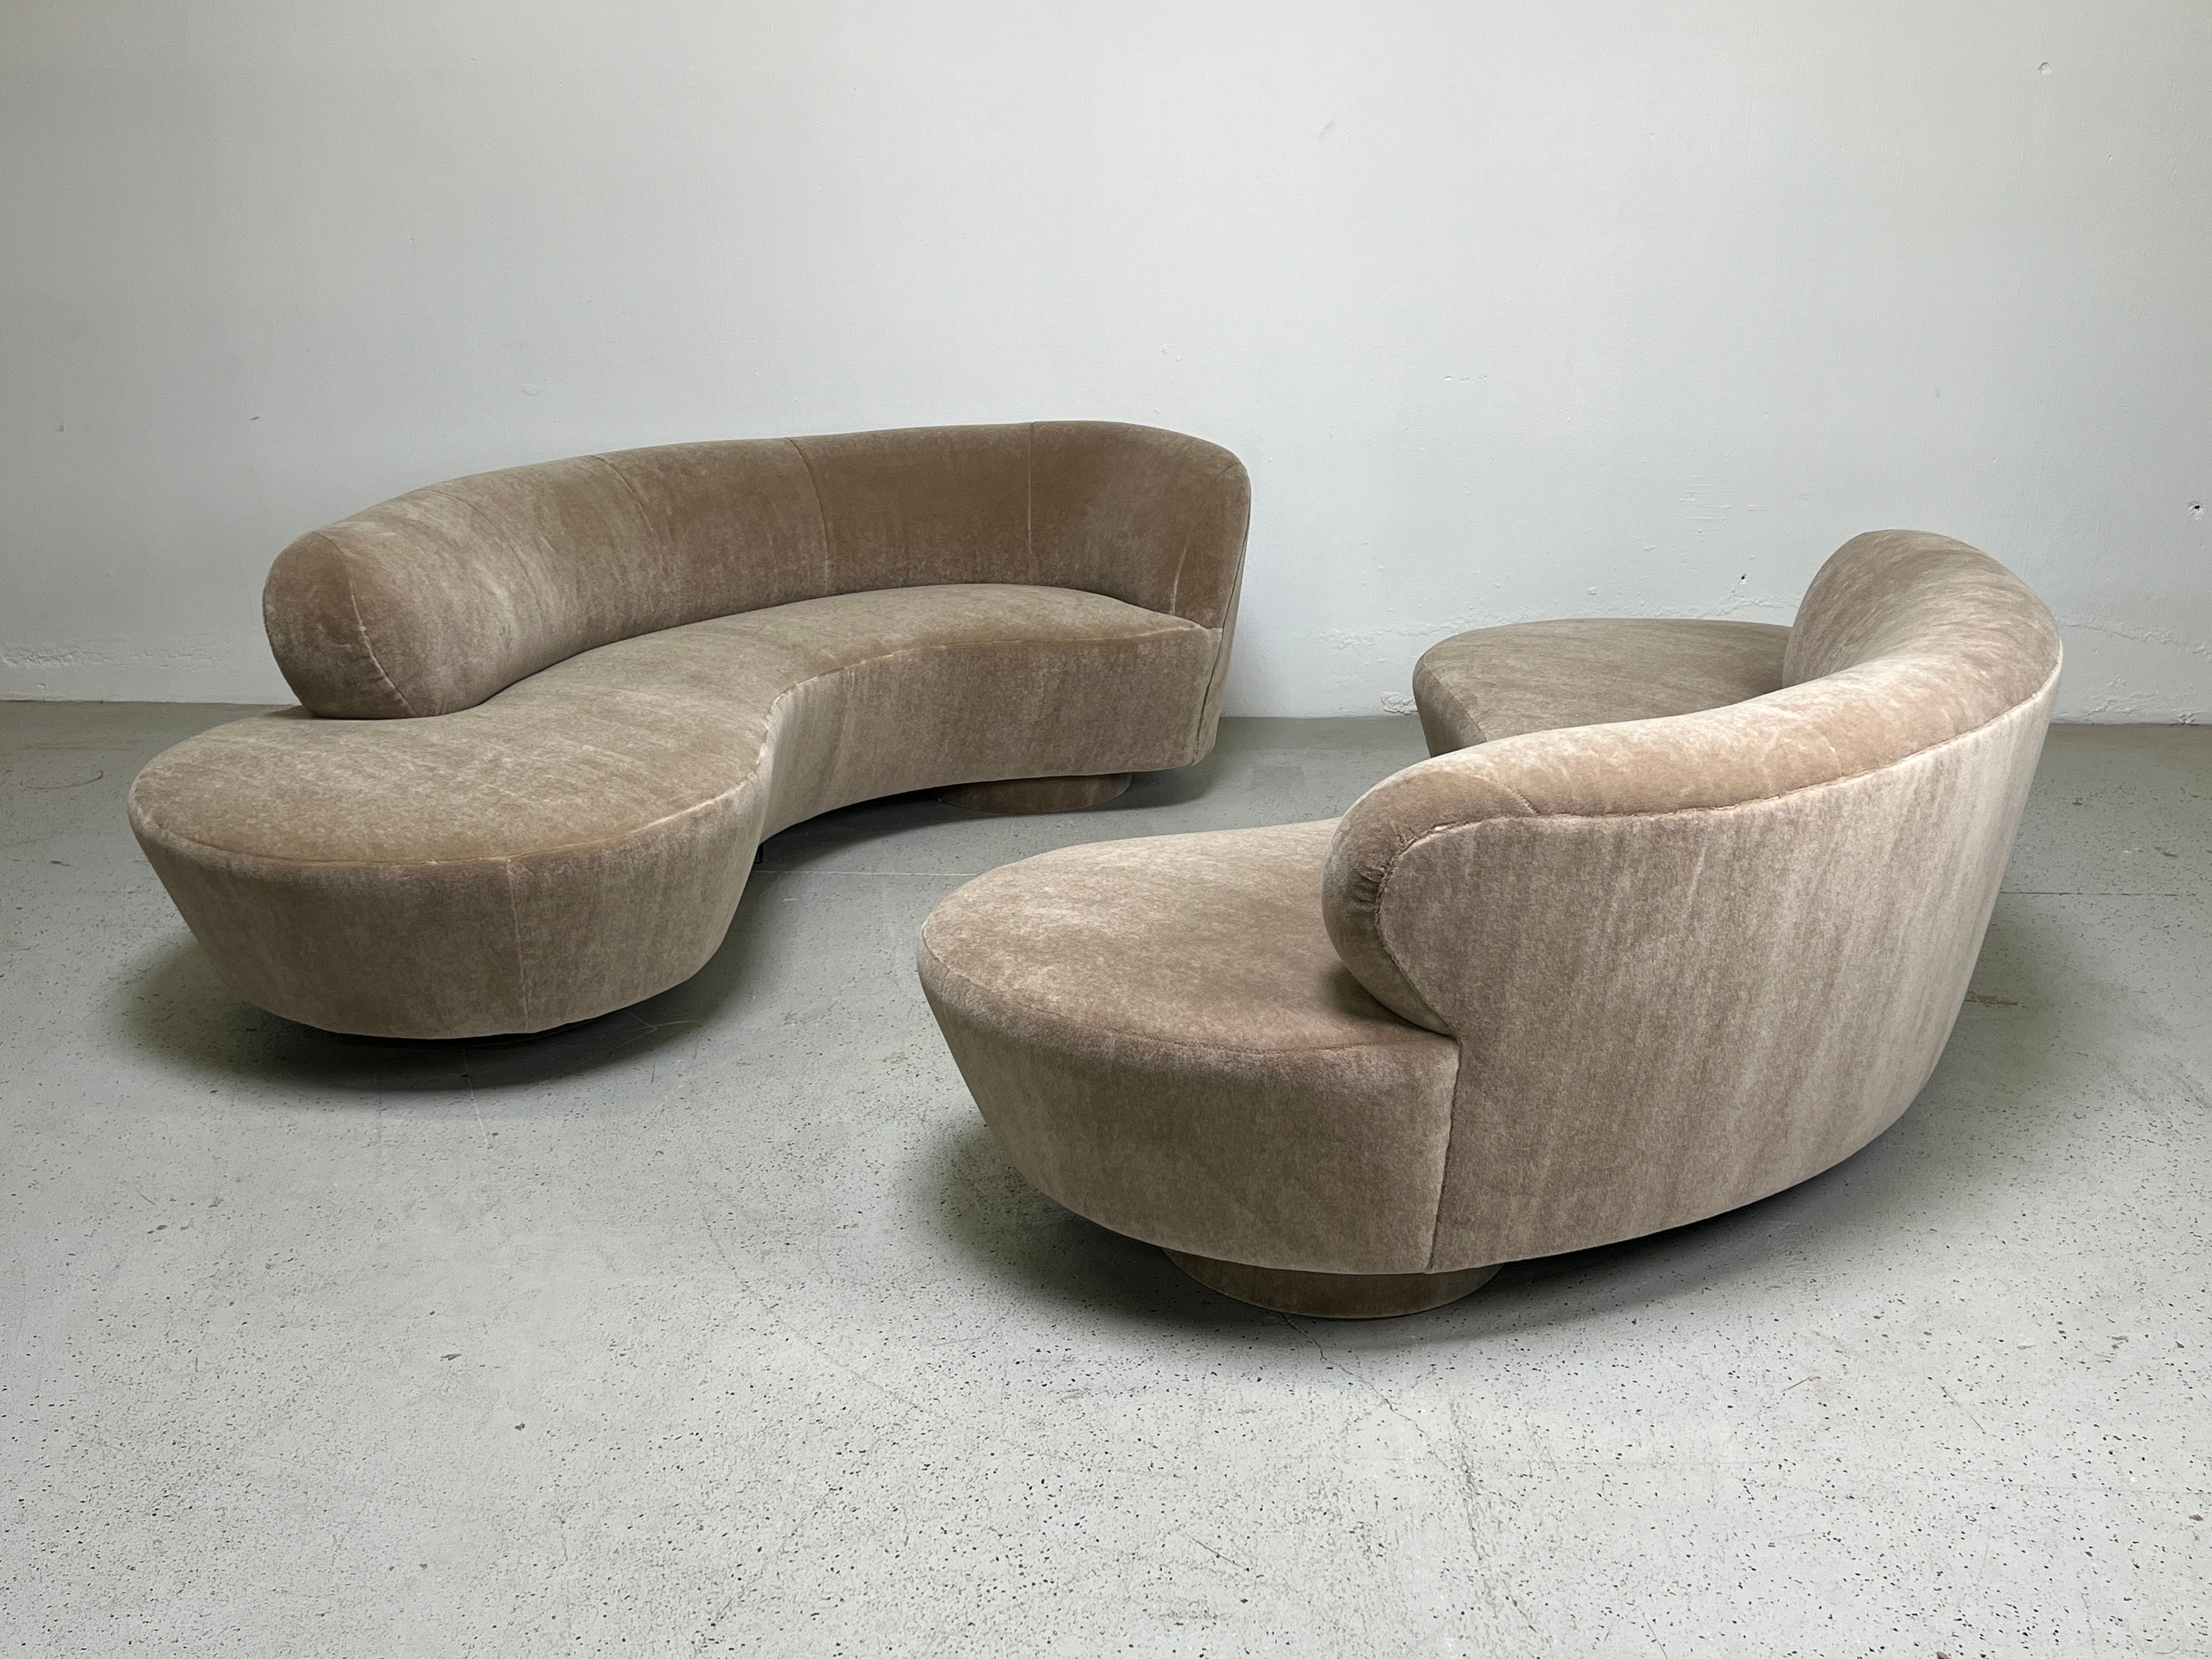 A pair of serpentine / cloud sofas designed by Vladimir Kagan for Directional. Fully restored and upholstered in Holly Hunt / Fuzzy Wuzzy / Honey Bear plush mohair.